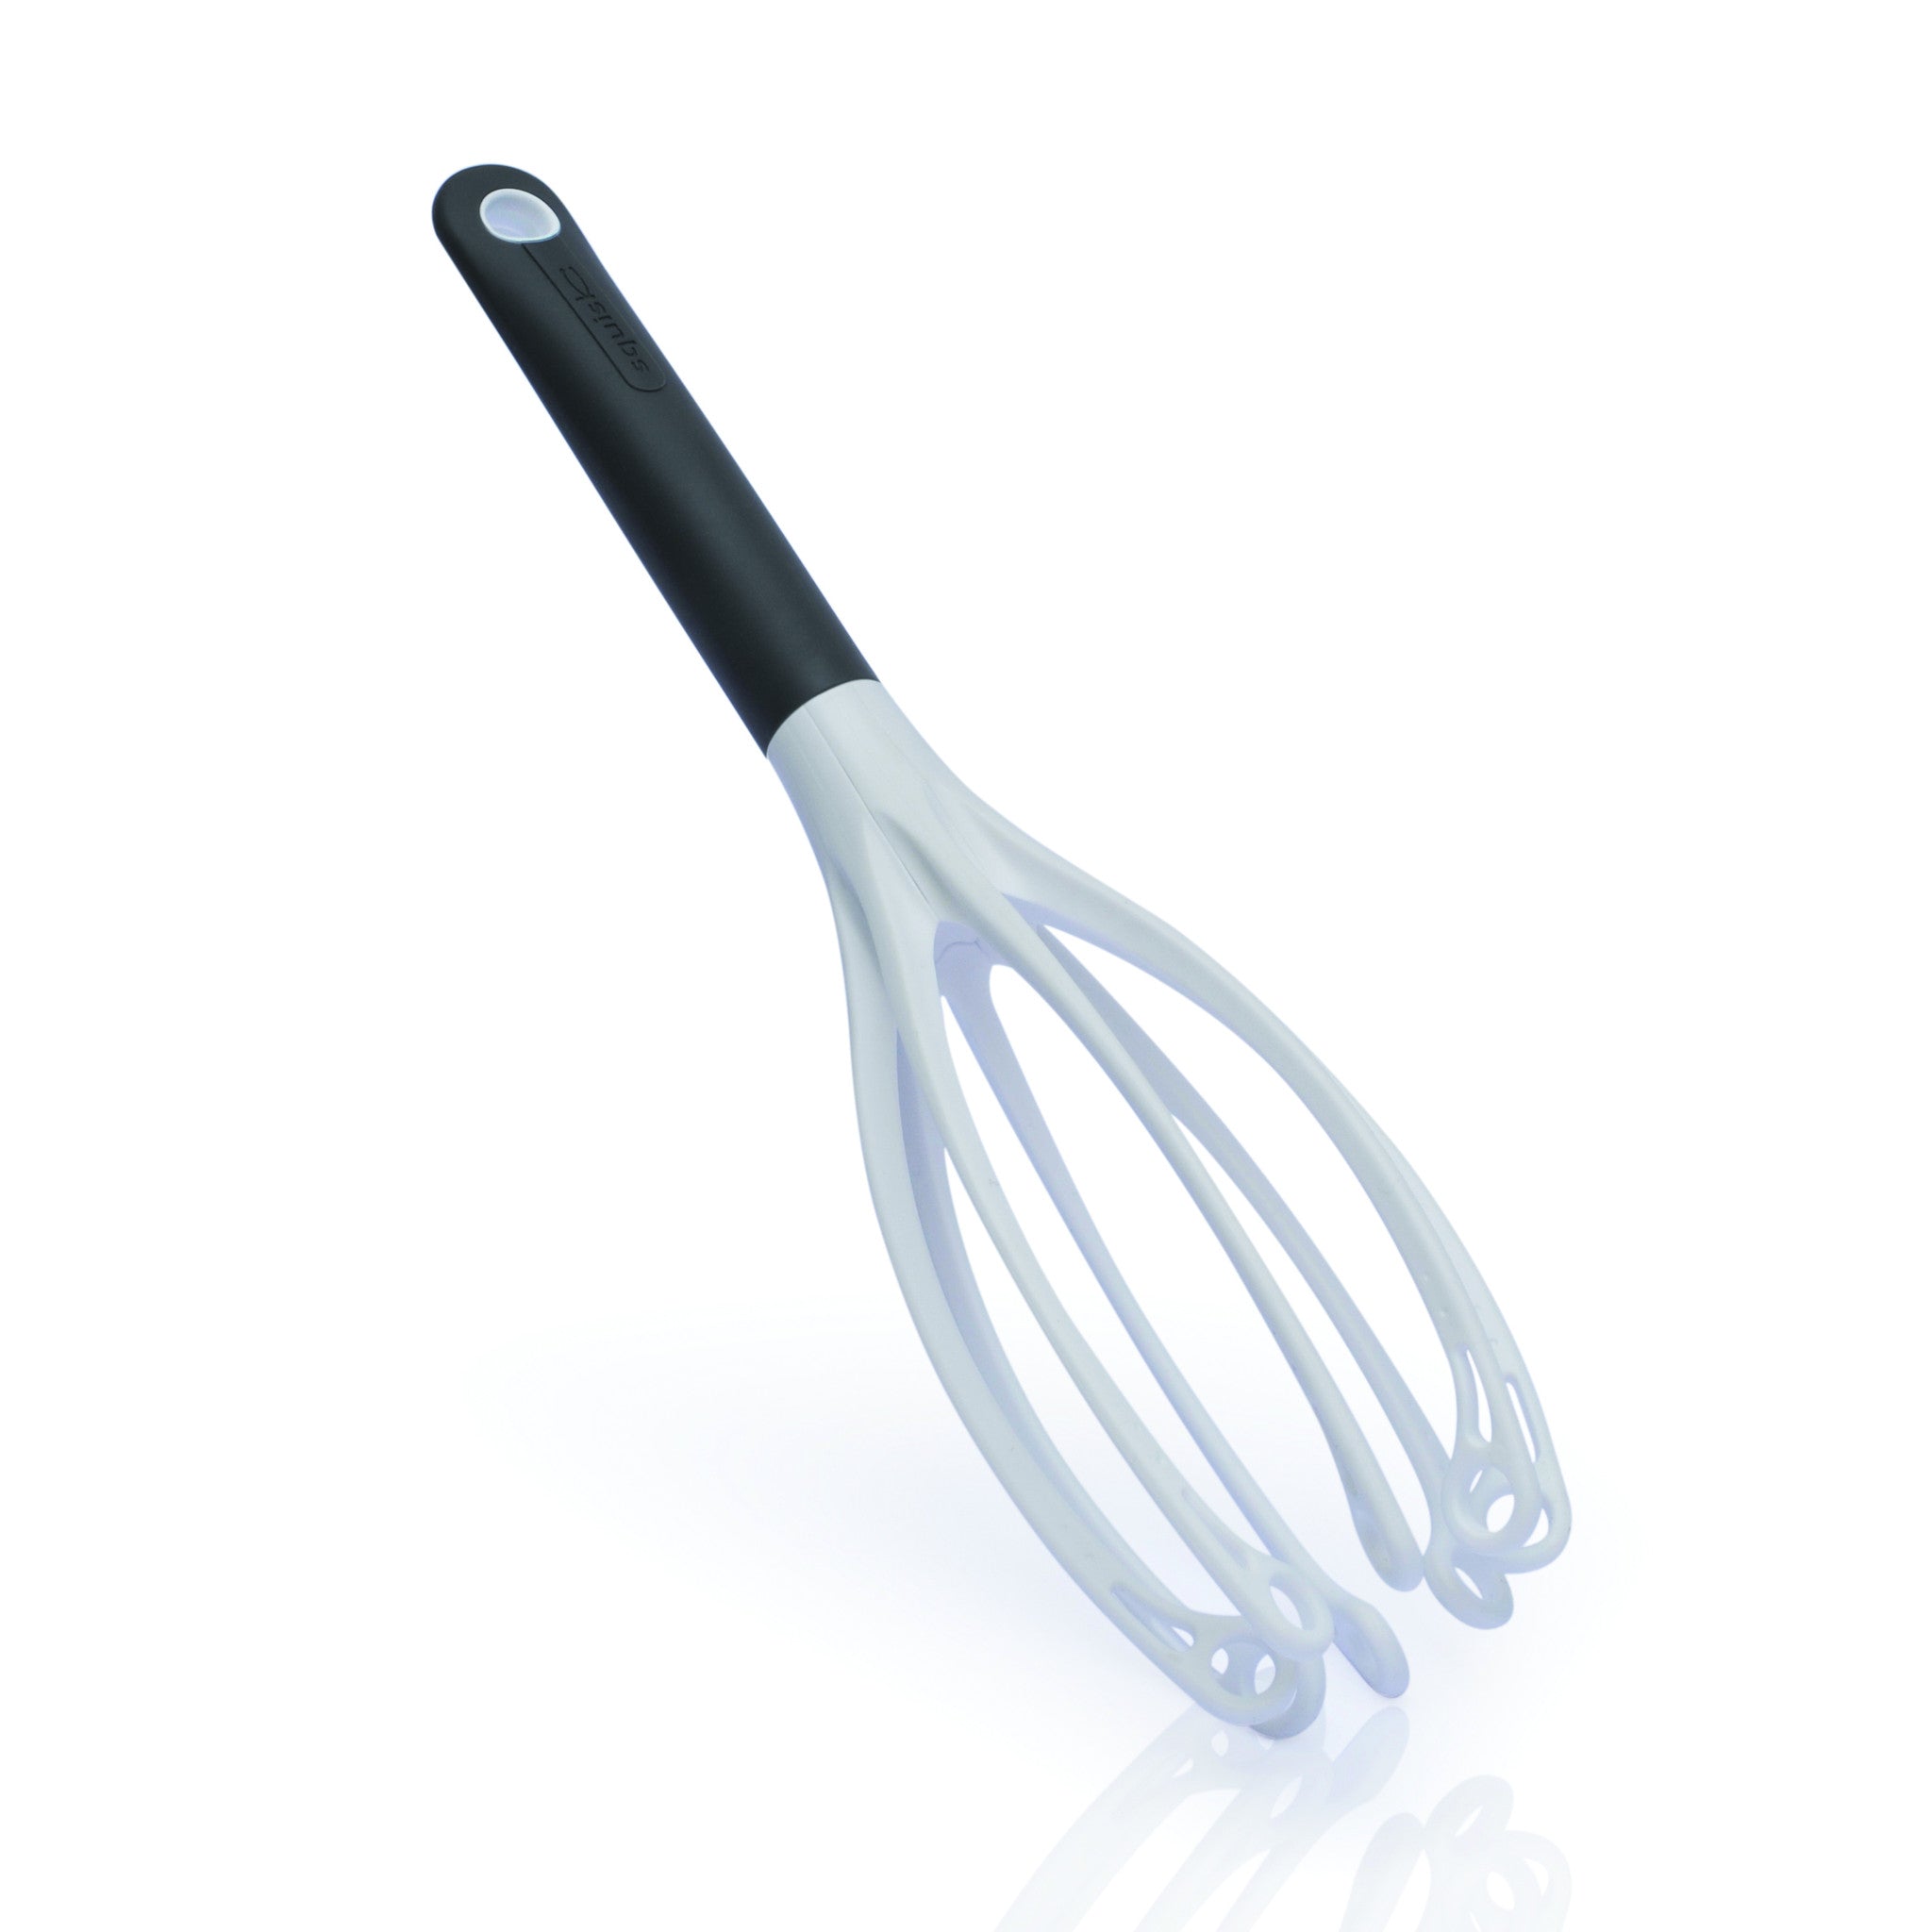 Squisk - Innovative Whisk - Innovative and Exciting Kitchen